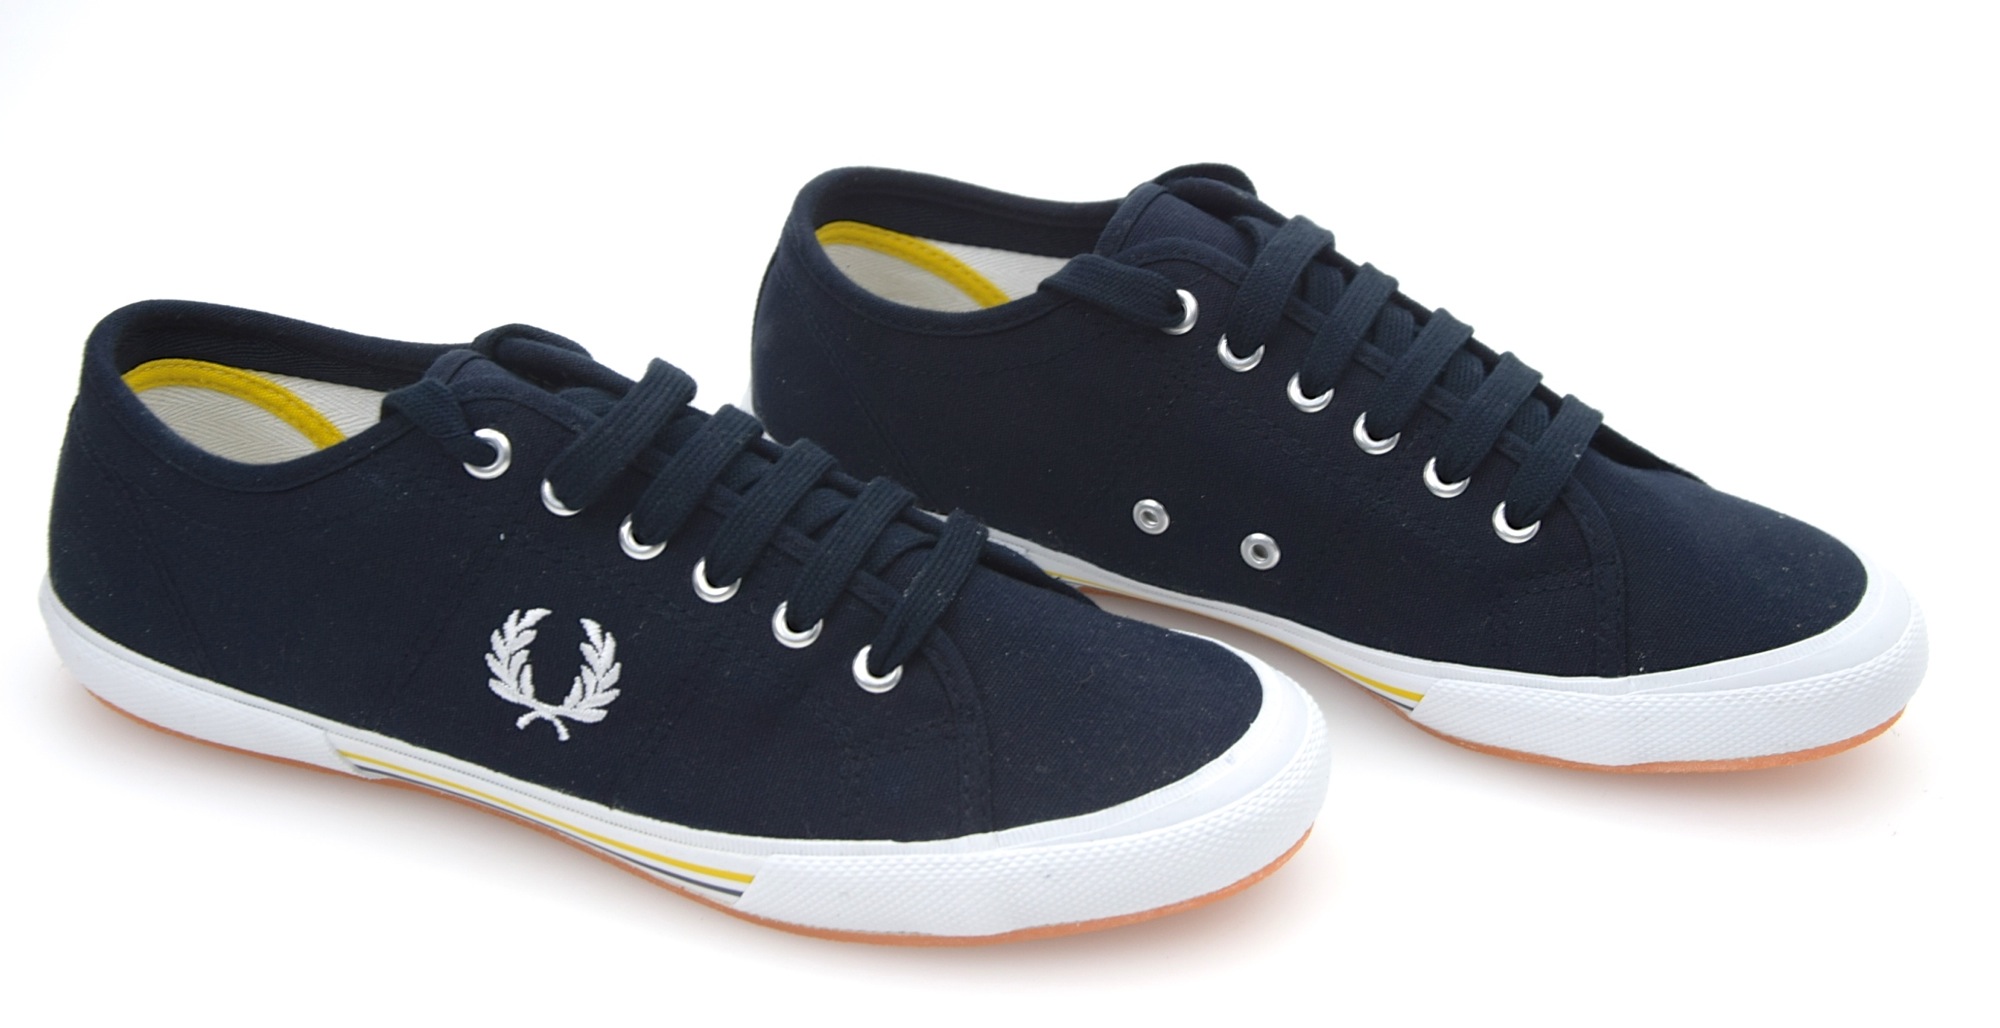 FRED PERRY MAN SNEAKER SHOES BLUE NAVY AND WHITE CANVAS CODE B708 | eBay